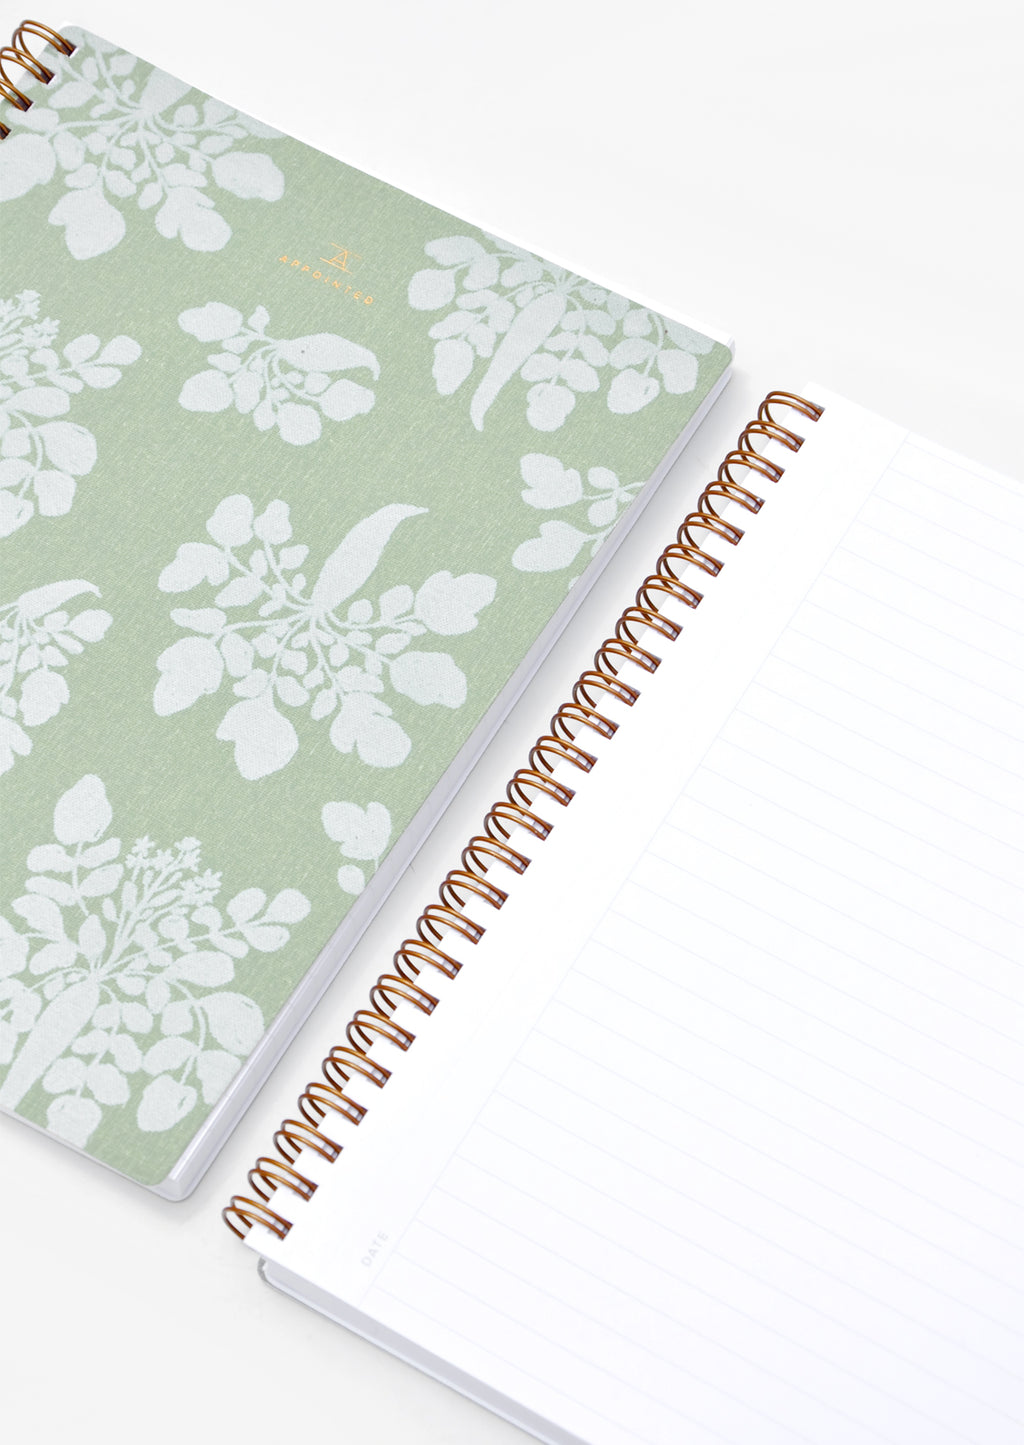 3: Appointed x Lewis Notebook in  - LEIF